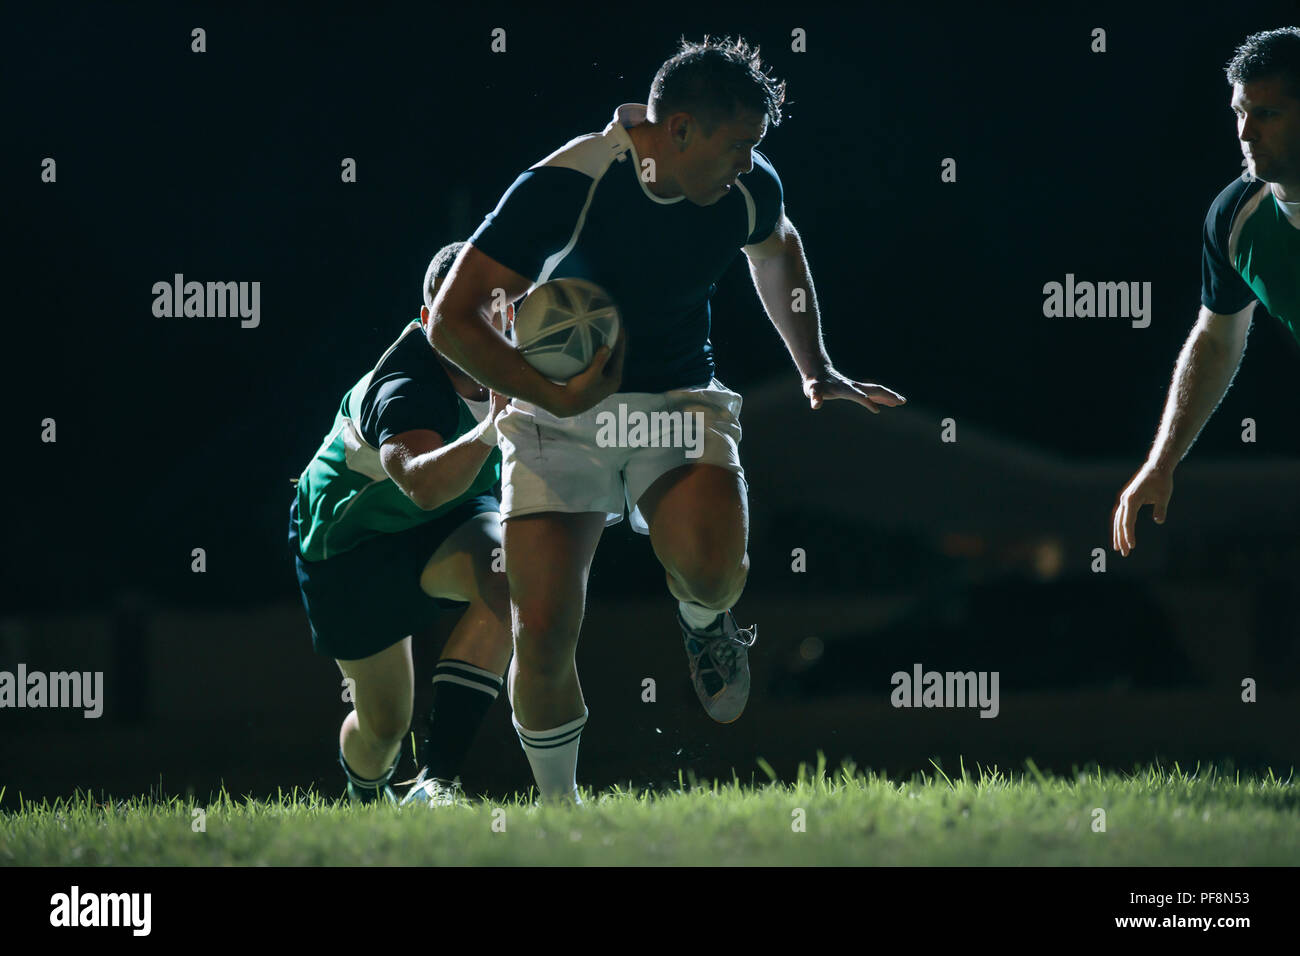 Flanker running with ball and tackling opponents during game. Rugby match in action. Stock Photo